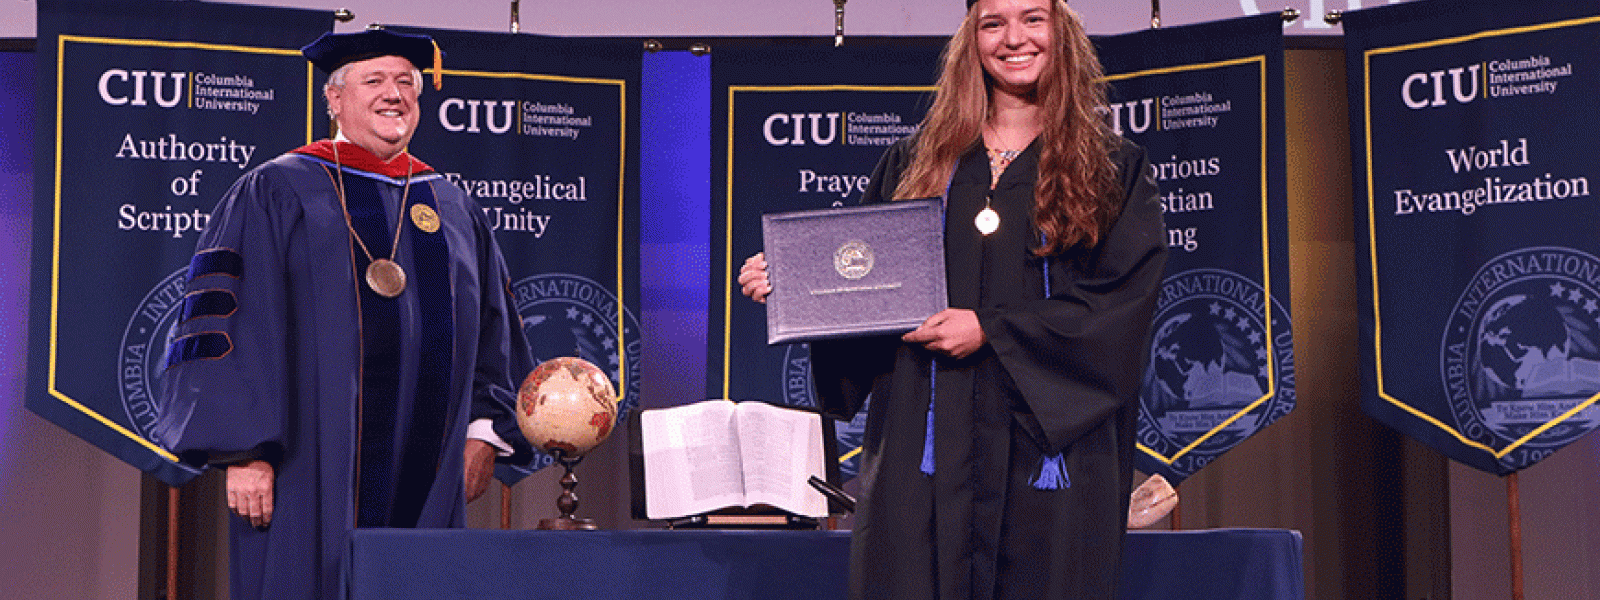 Graduation from CIU means a higher quality program at a lower cost.